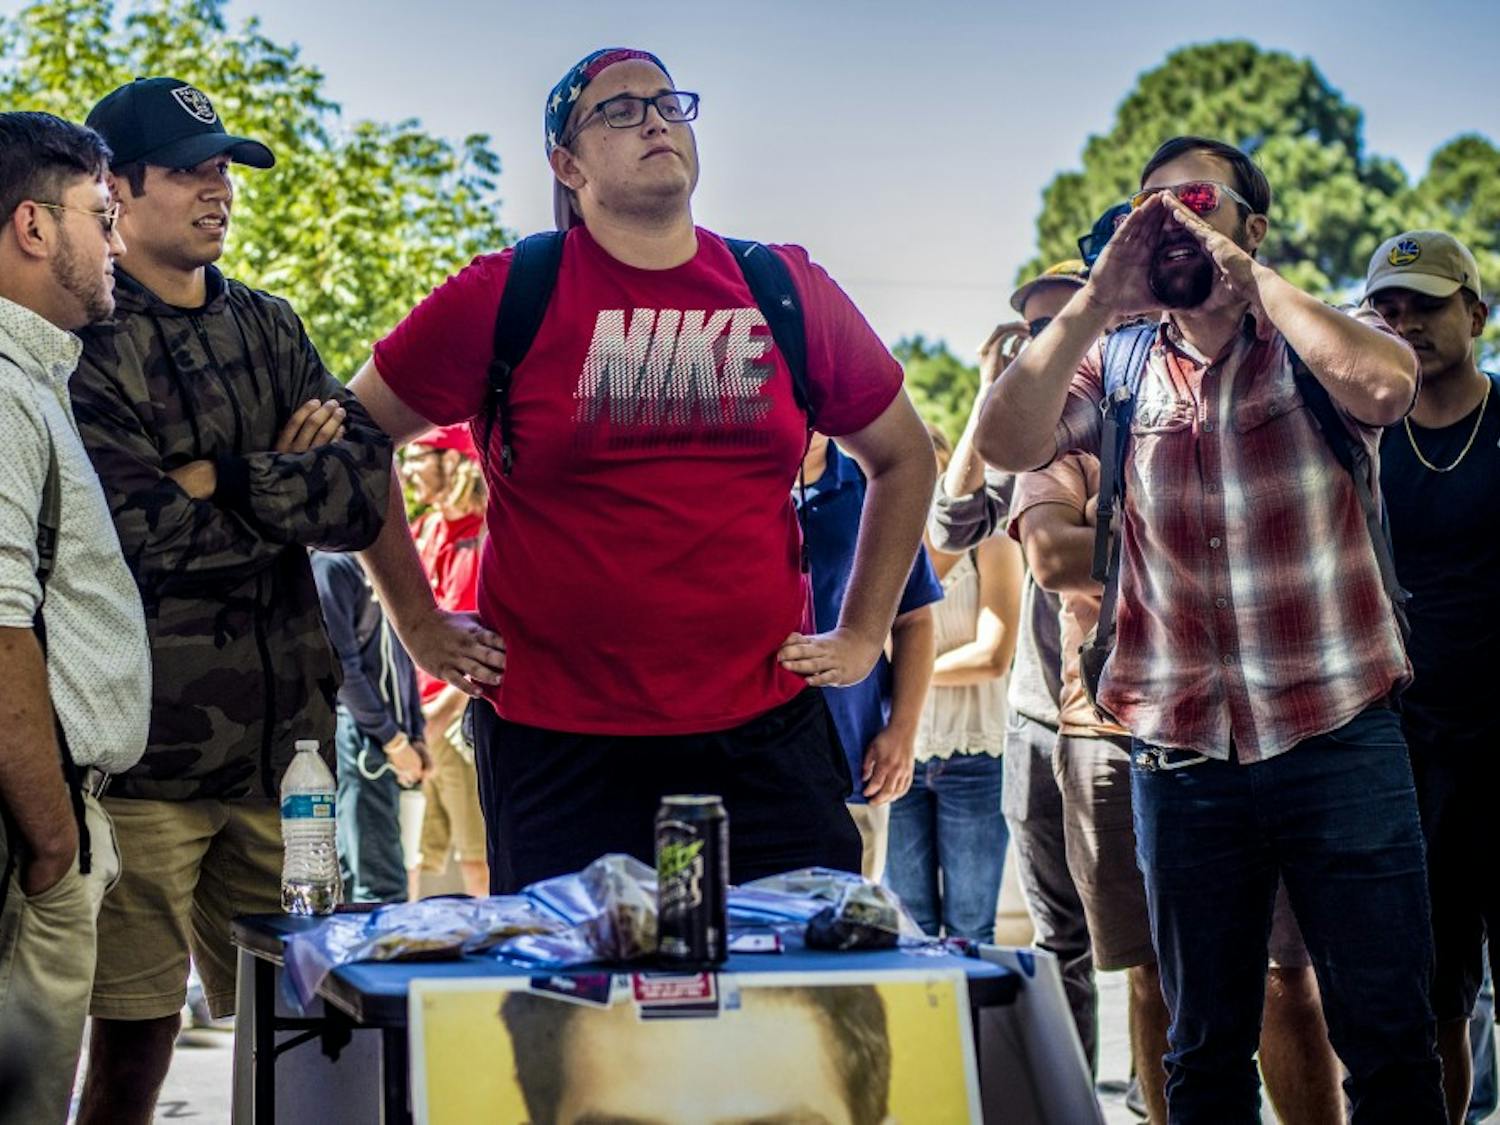 Walter Baker, graduate student, right, shouts in contention to an "Affirmative Action Bake Sale" hosted by a local chapter of Turning Point USA outside the student union building, Thursday, September 21, 2017. The student group hosted the bake sale which charged patrons according to their ethnicity.